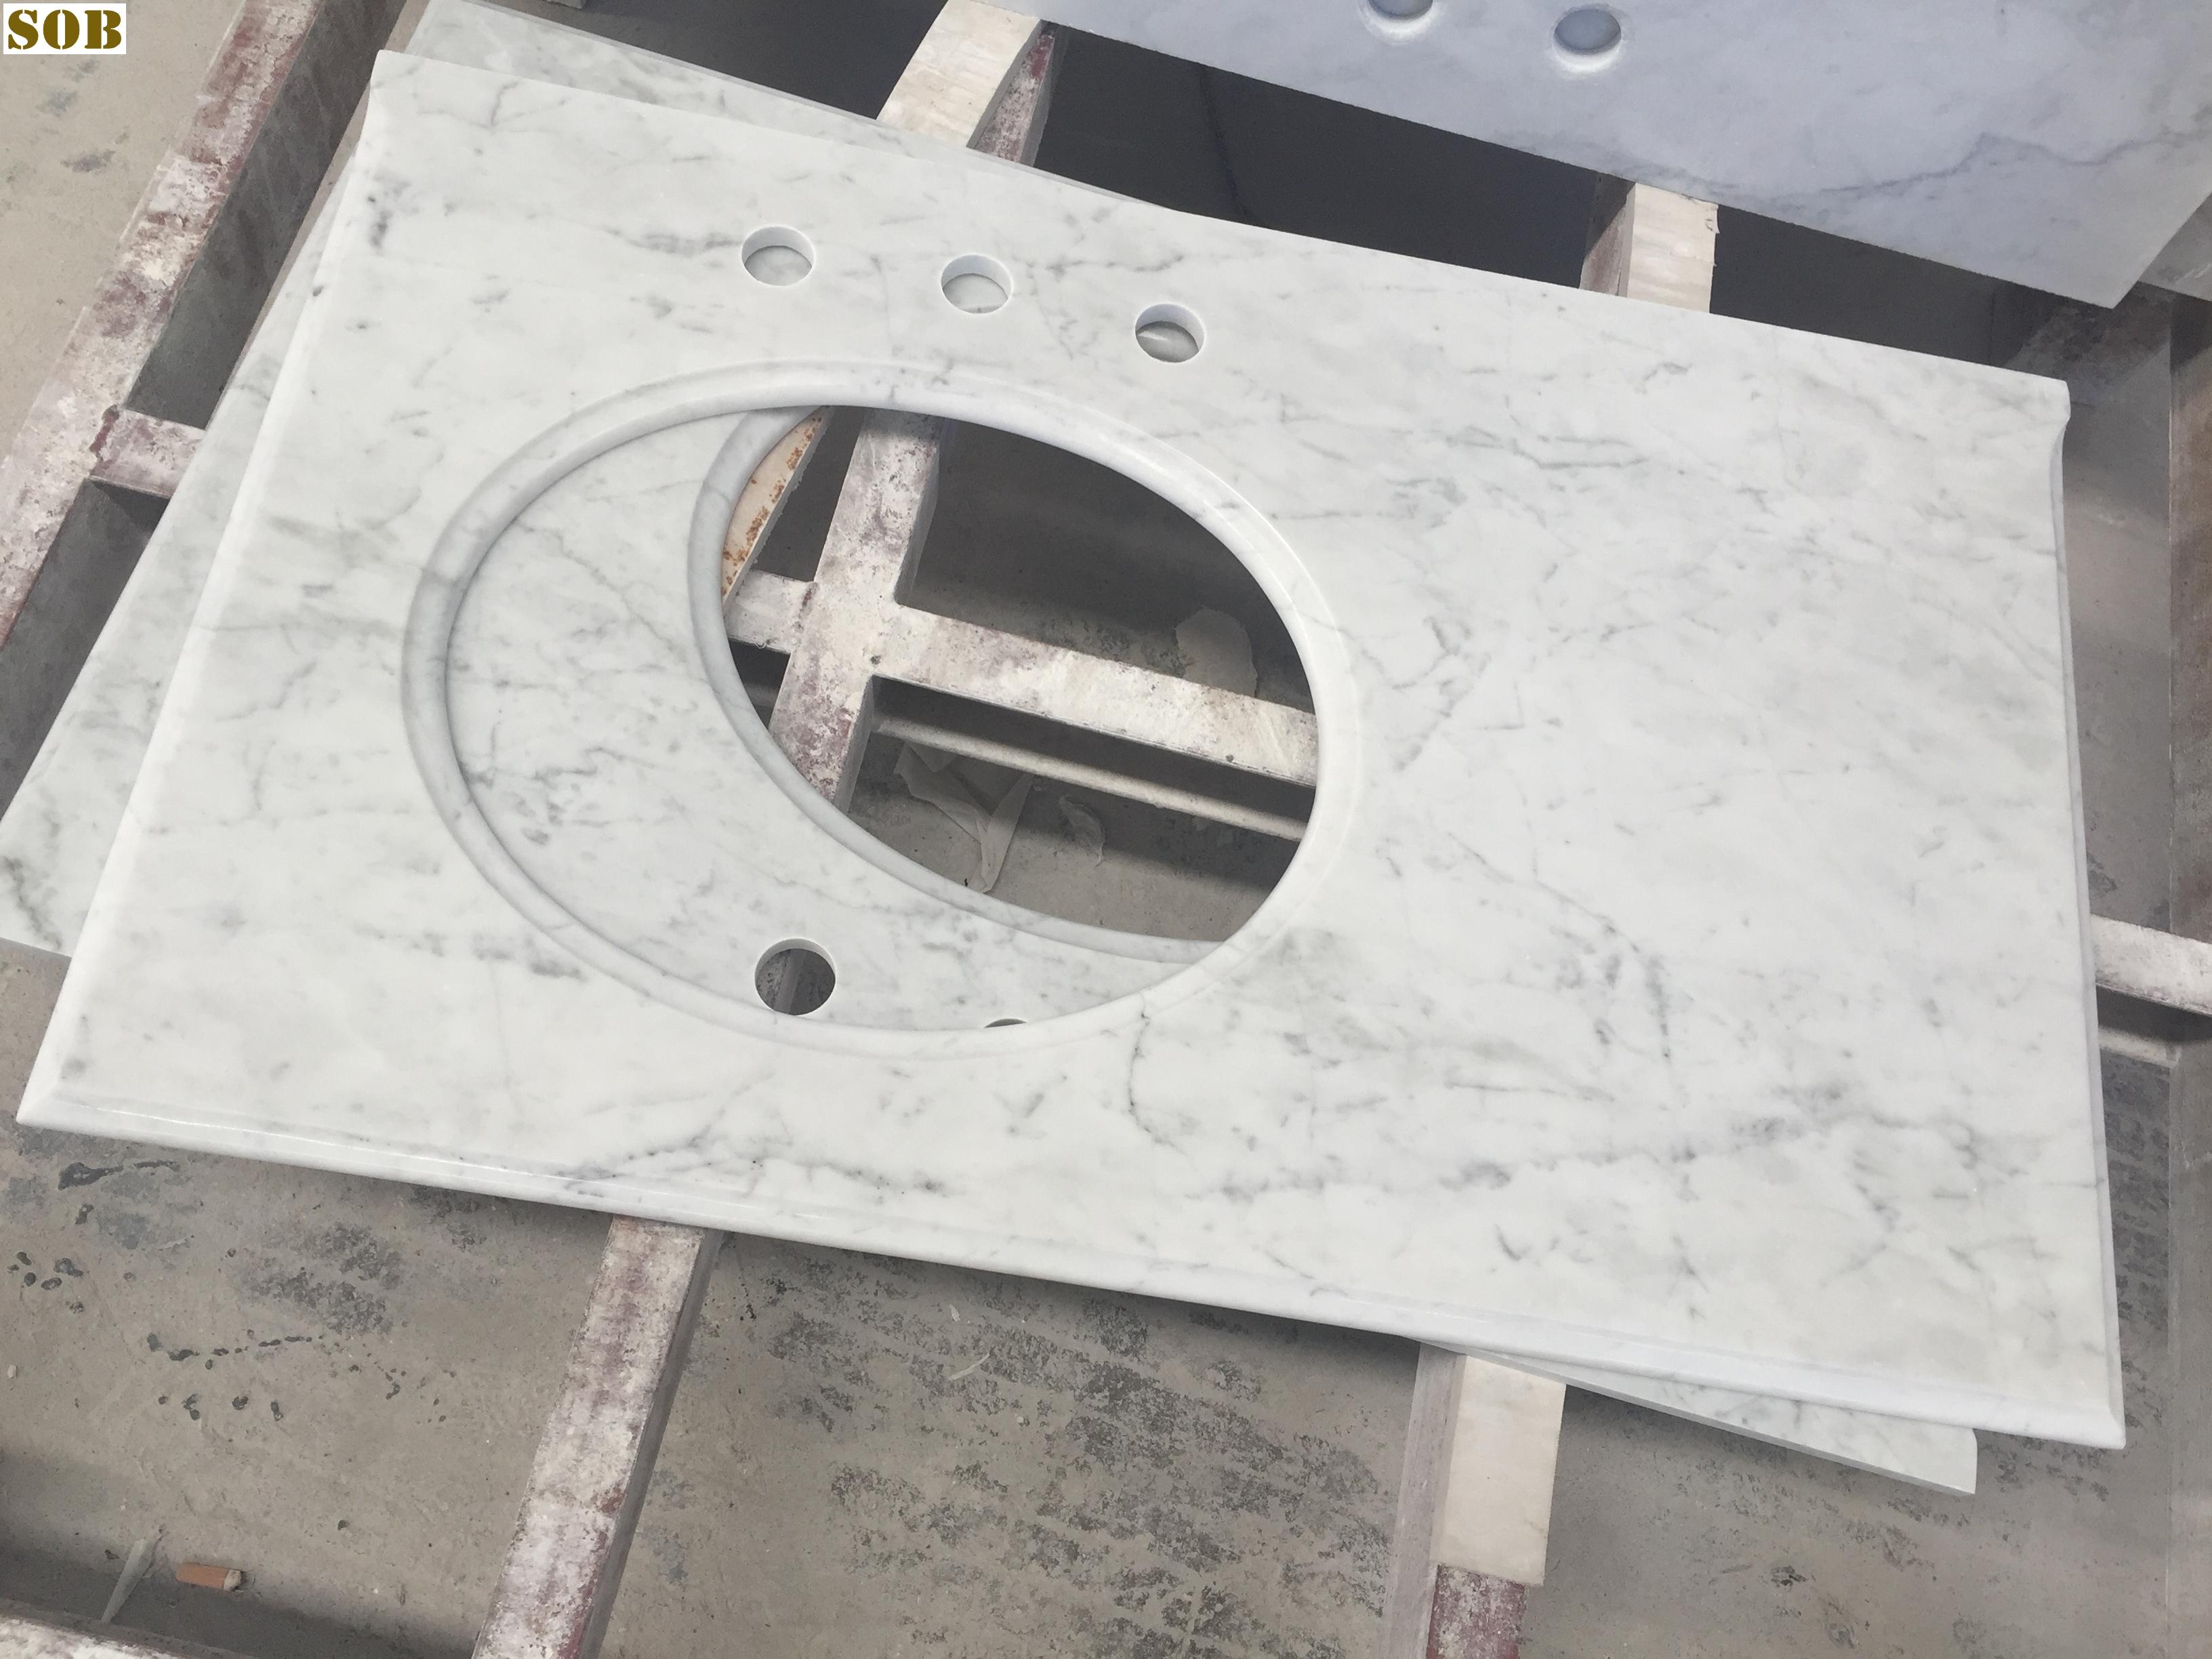 Carrara White Marble Vanity Tops with Undermounted Sink Hole